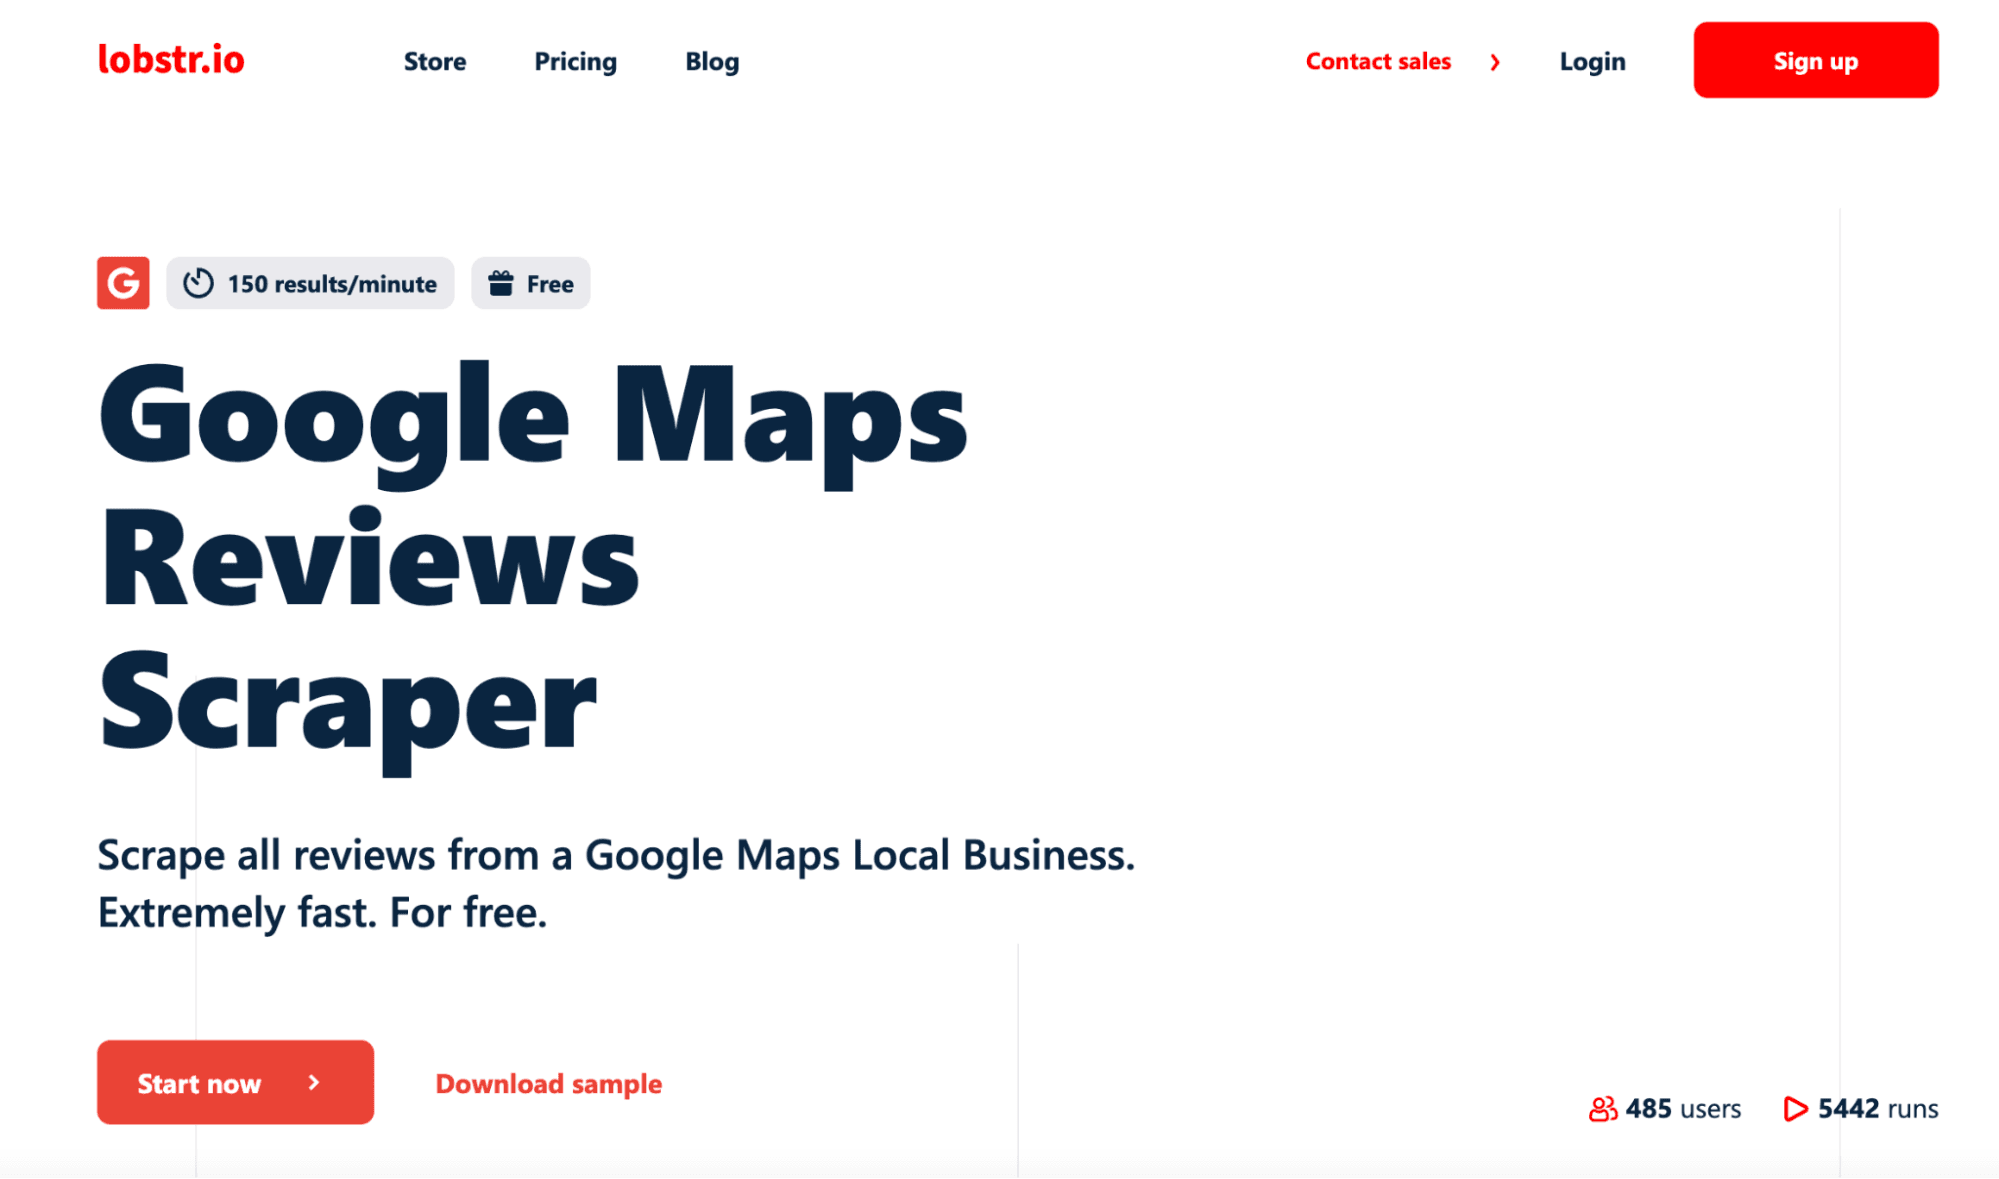 google maps reviews scraper lobstr io product page - image16.png